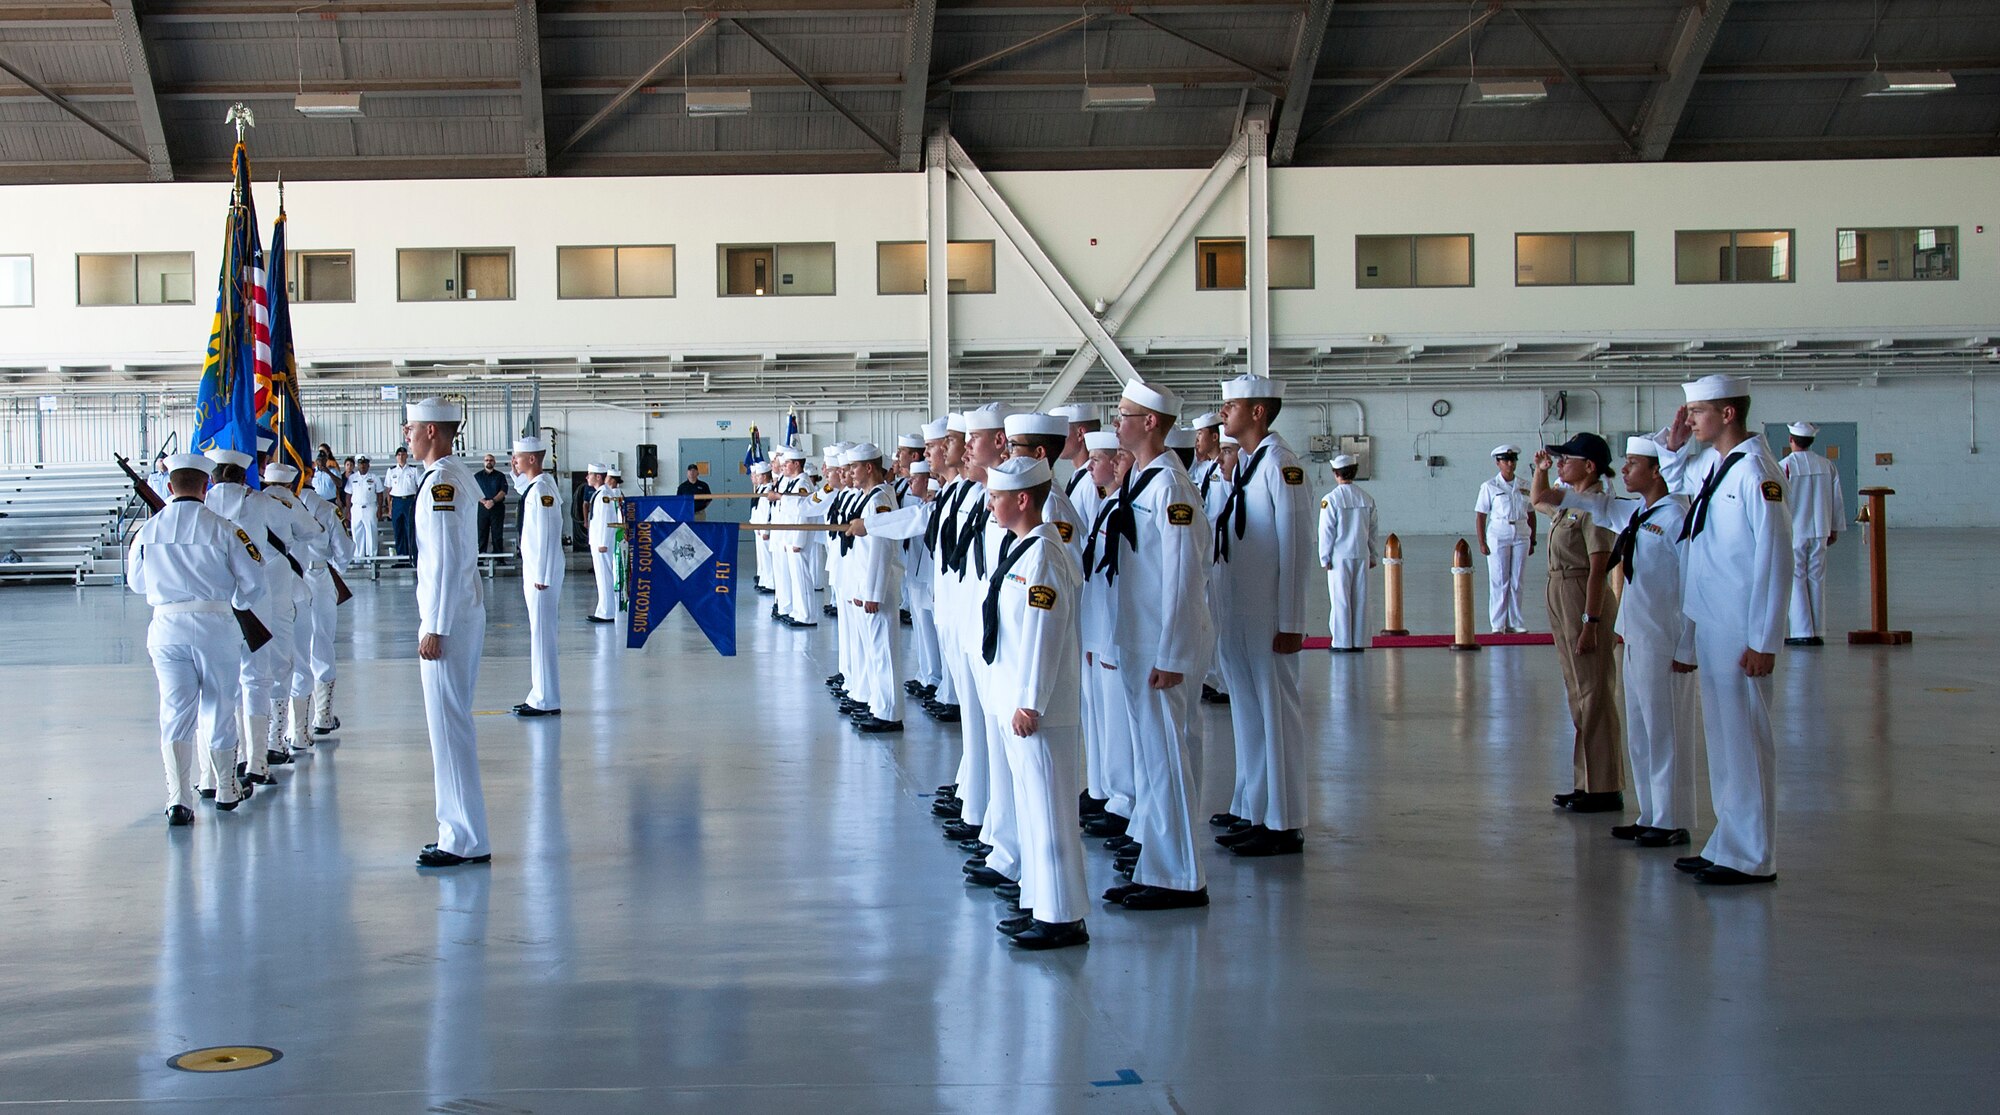 U.S. Naval Sea Cadet Corps (USNSCC) recruit training flight 1902 conducts a graduation ceremony, July 20, 2019, at MacDill Air Force Base, Fla. The USNSCC is a national youth leadership development organization that promotes interest in naval disciplines and is modeled after the Navy’s professional development system. (U.S. Air Force photo by Airman 1st Class Shannon Bowman)